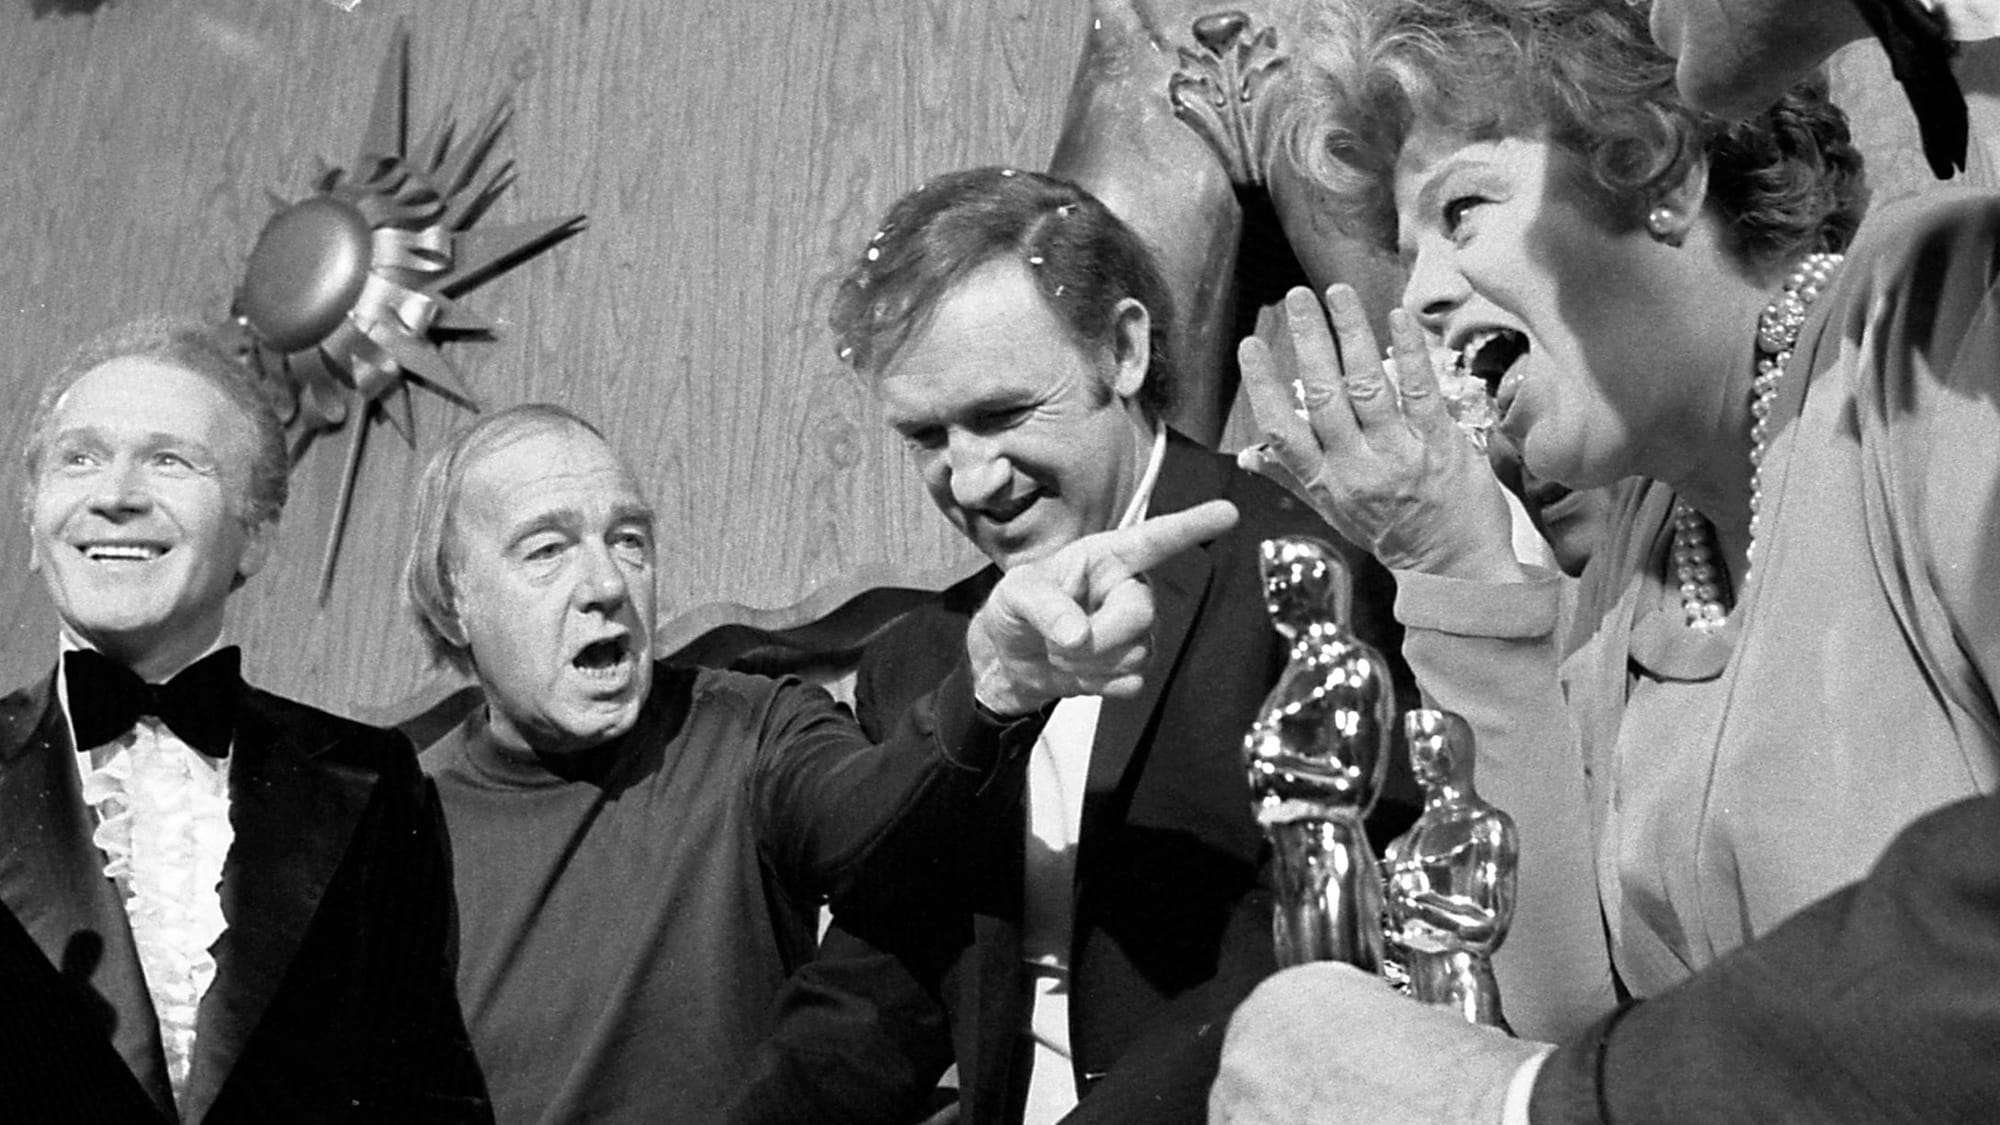  Academy Award winner Gene Hackman cuts cake on set of his new film, The Poseidon Adventure, at 20th Century Fox. Cast members who'd previously won Oscars join in celebration. From left are Red Buttons, Ronald Neame (director), Hackman, Shelley Winters and Ernest Borgnine. Hackman won an Oscar for role as a tough detective in The French Connection.